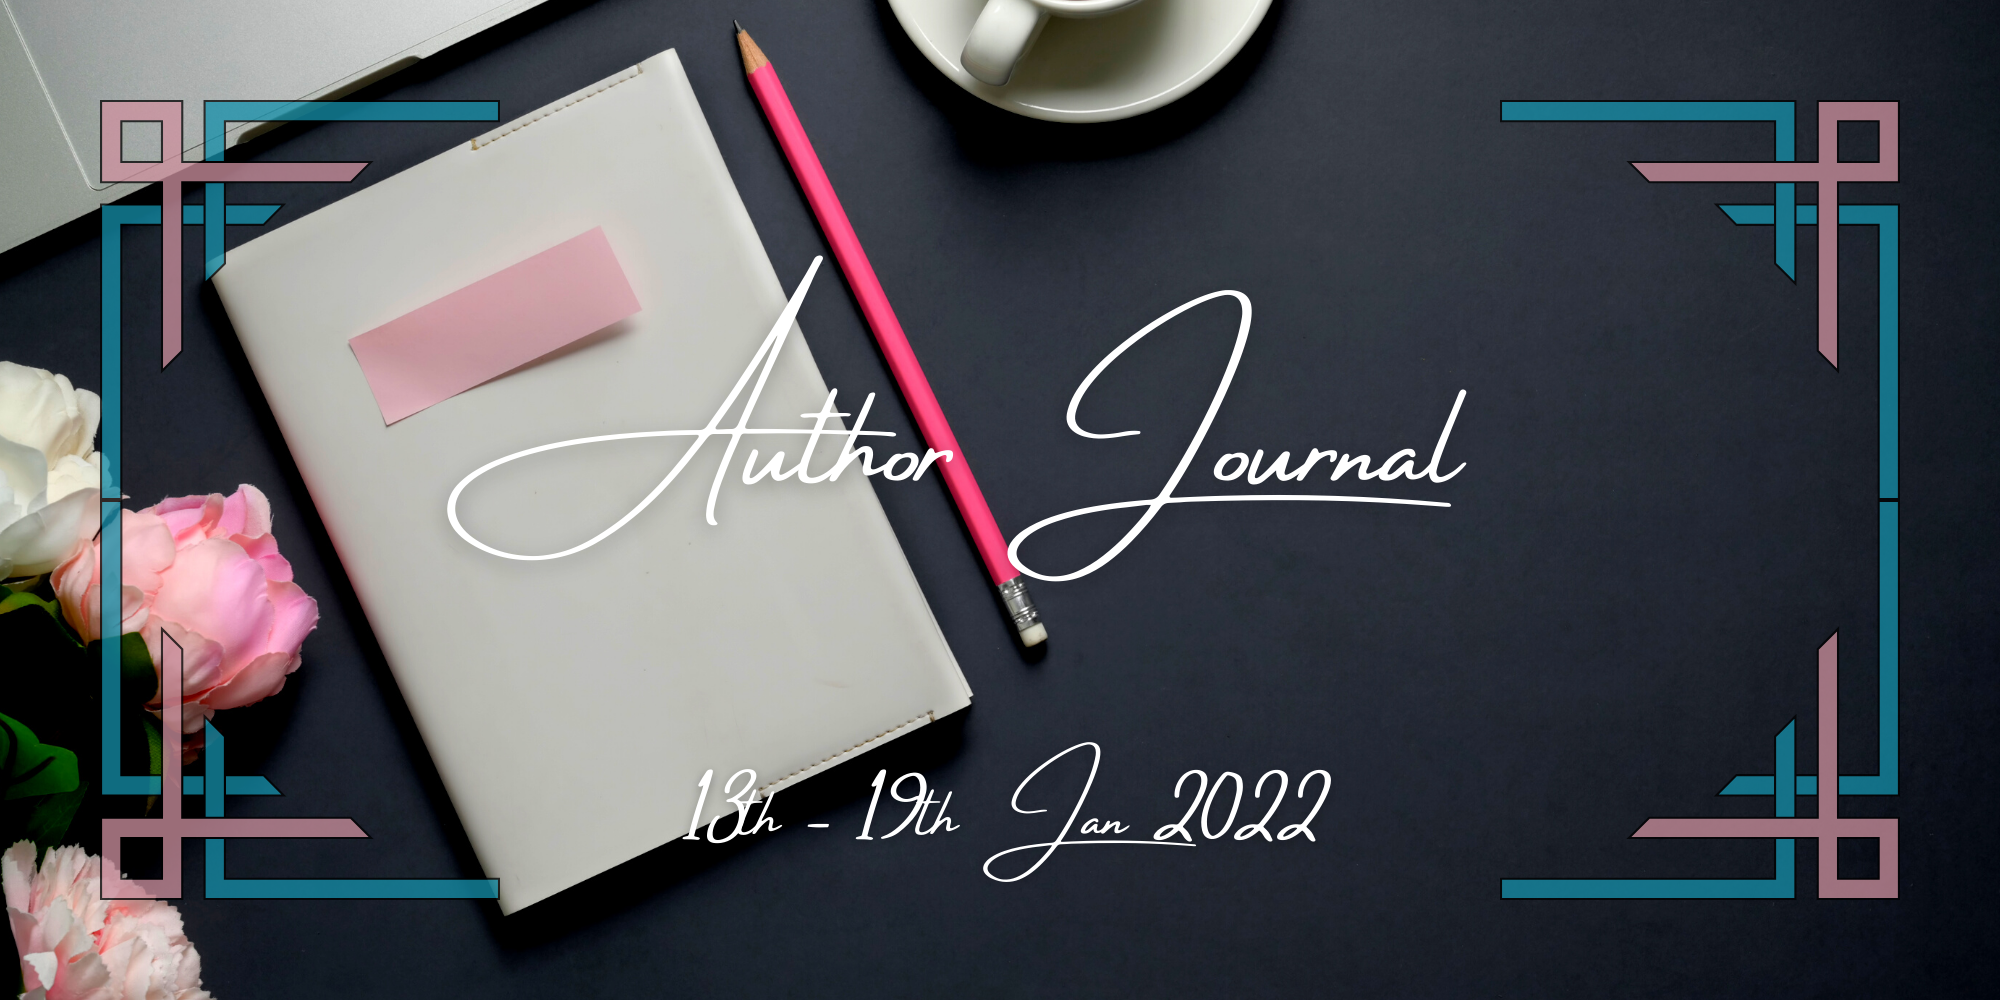 Author Journal 13th – 19th January 2022